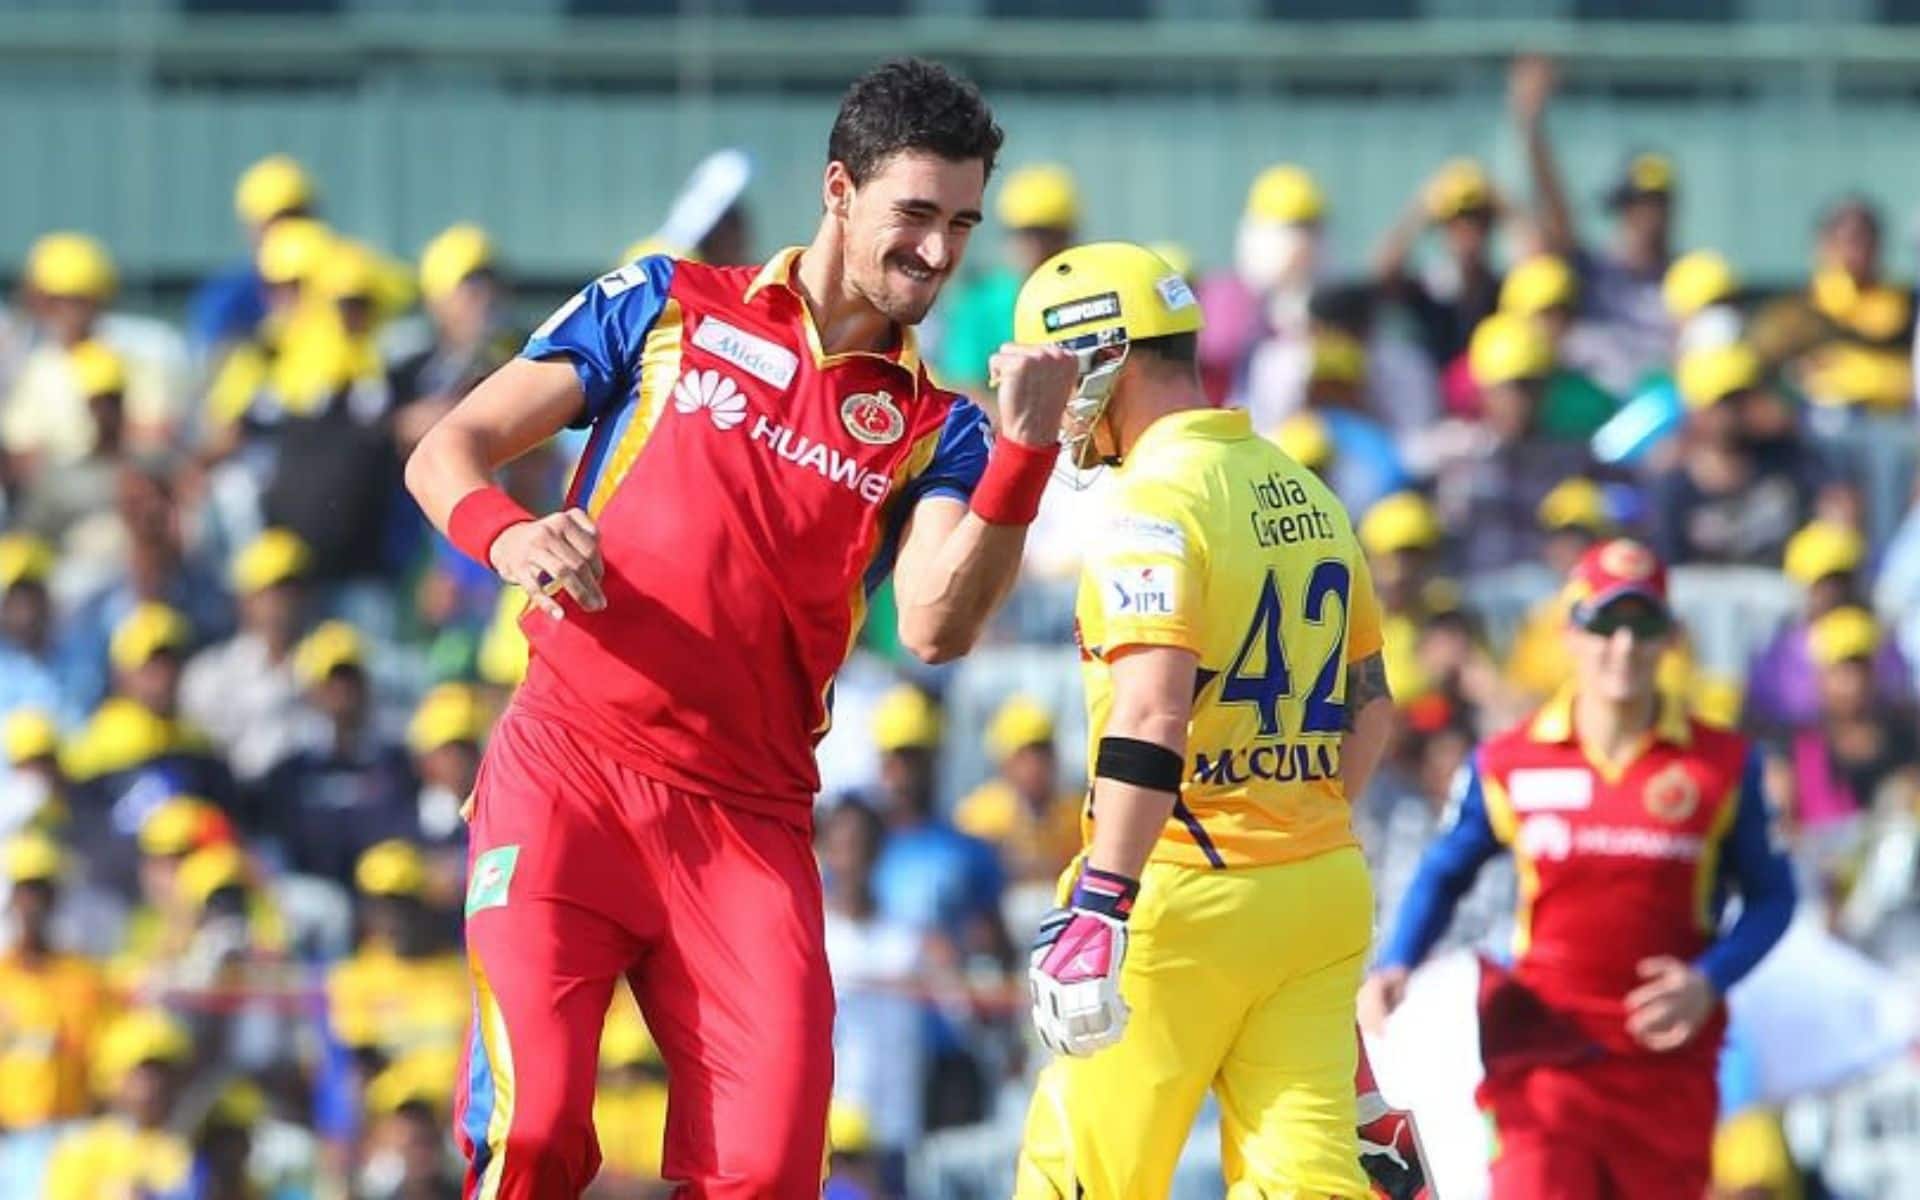 'It's Been 8 Years' - Mitchell Starc Opens Up Ahead of His IPL Return For KKR